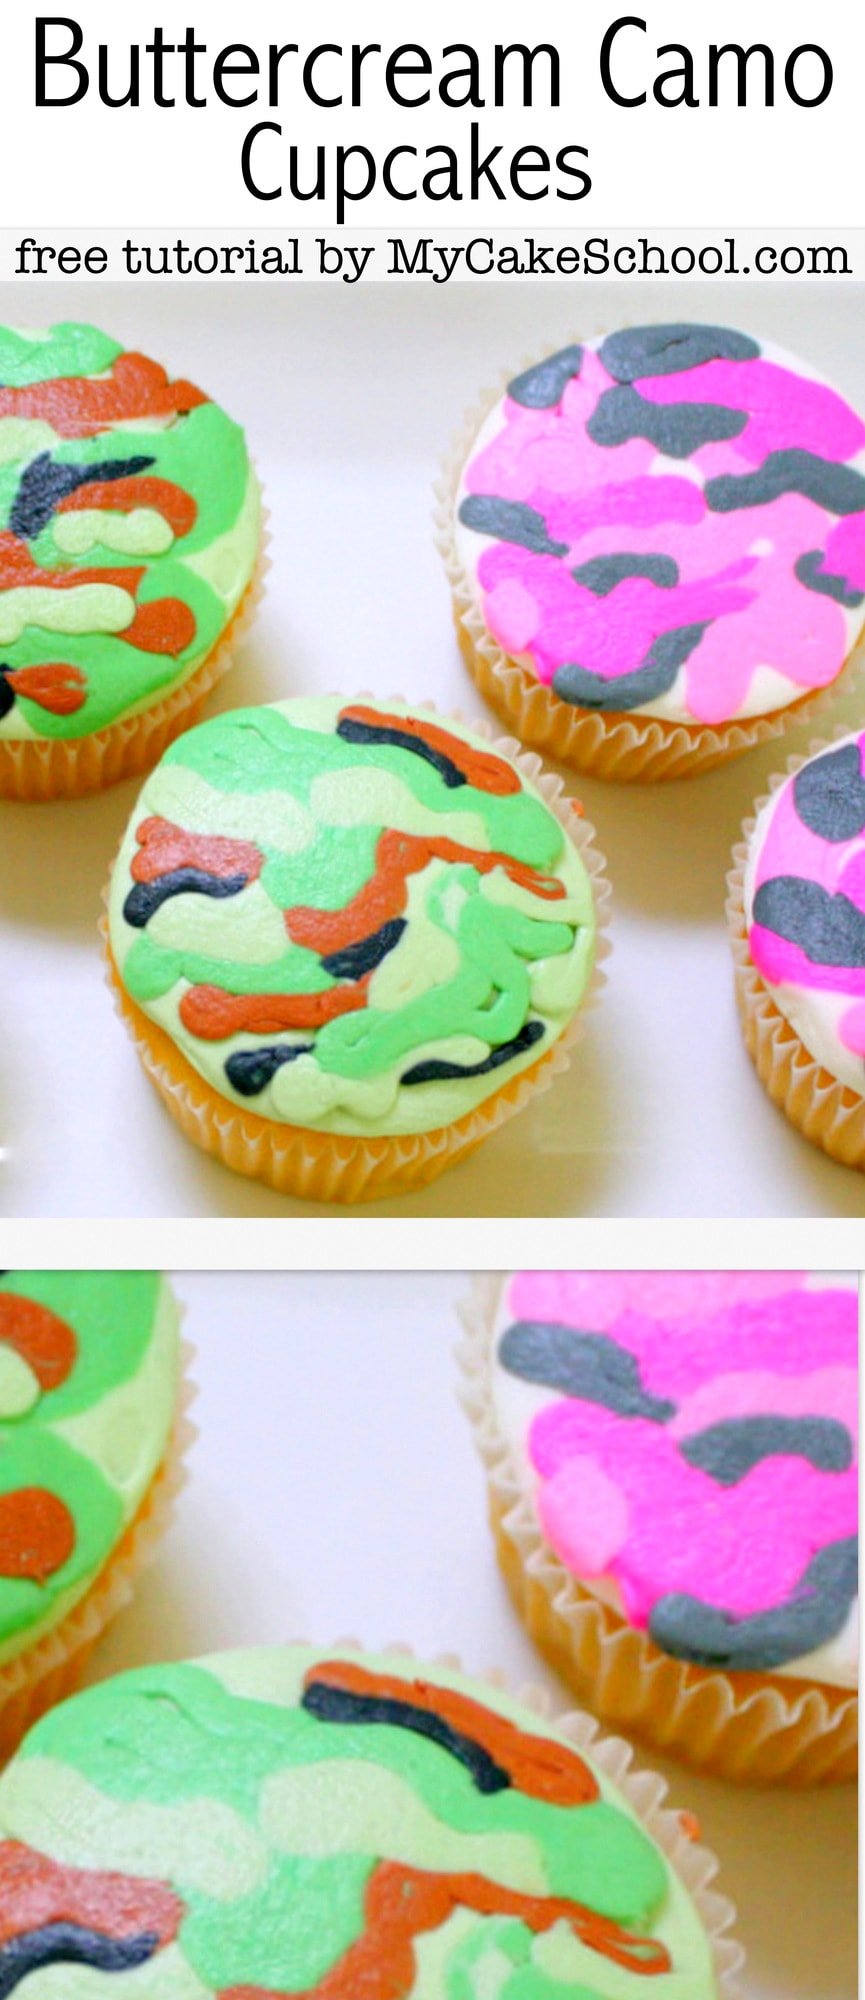 Learn how to make Buttercream Camo Cupcakes in this free MyCakeSchool.com cupcake tutorial! My Cake School Online cake and cupcake tutorials, recipes, and videos!